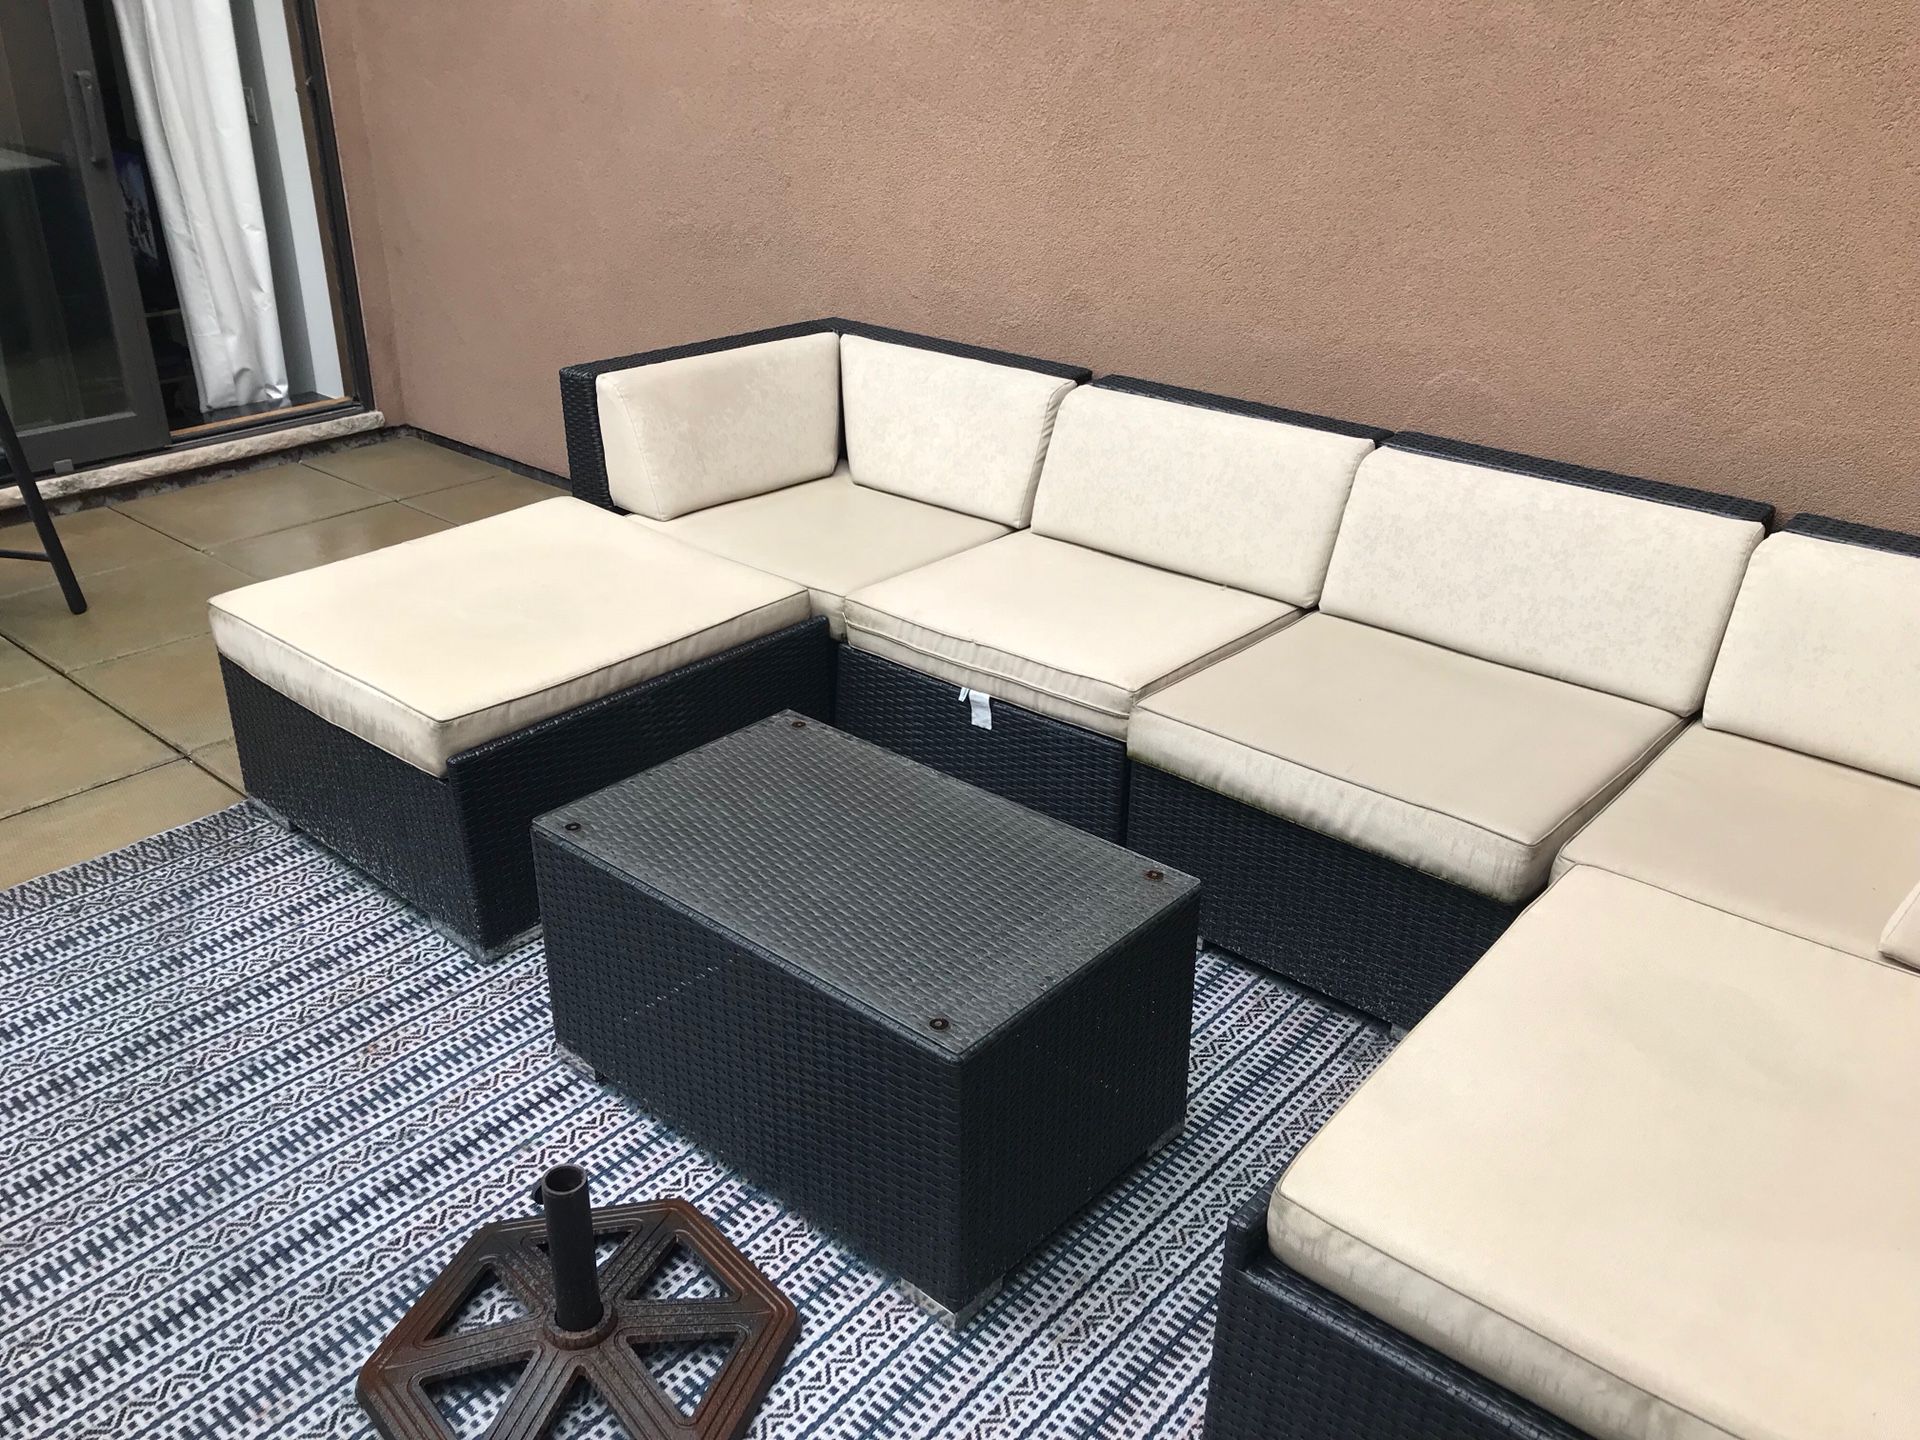 Outdoor furniture set-huge couch, coffee table & chaise